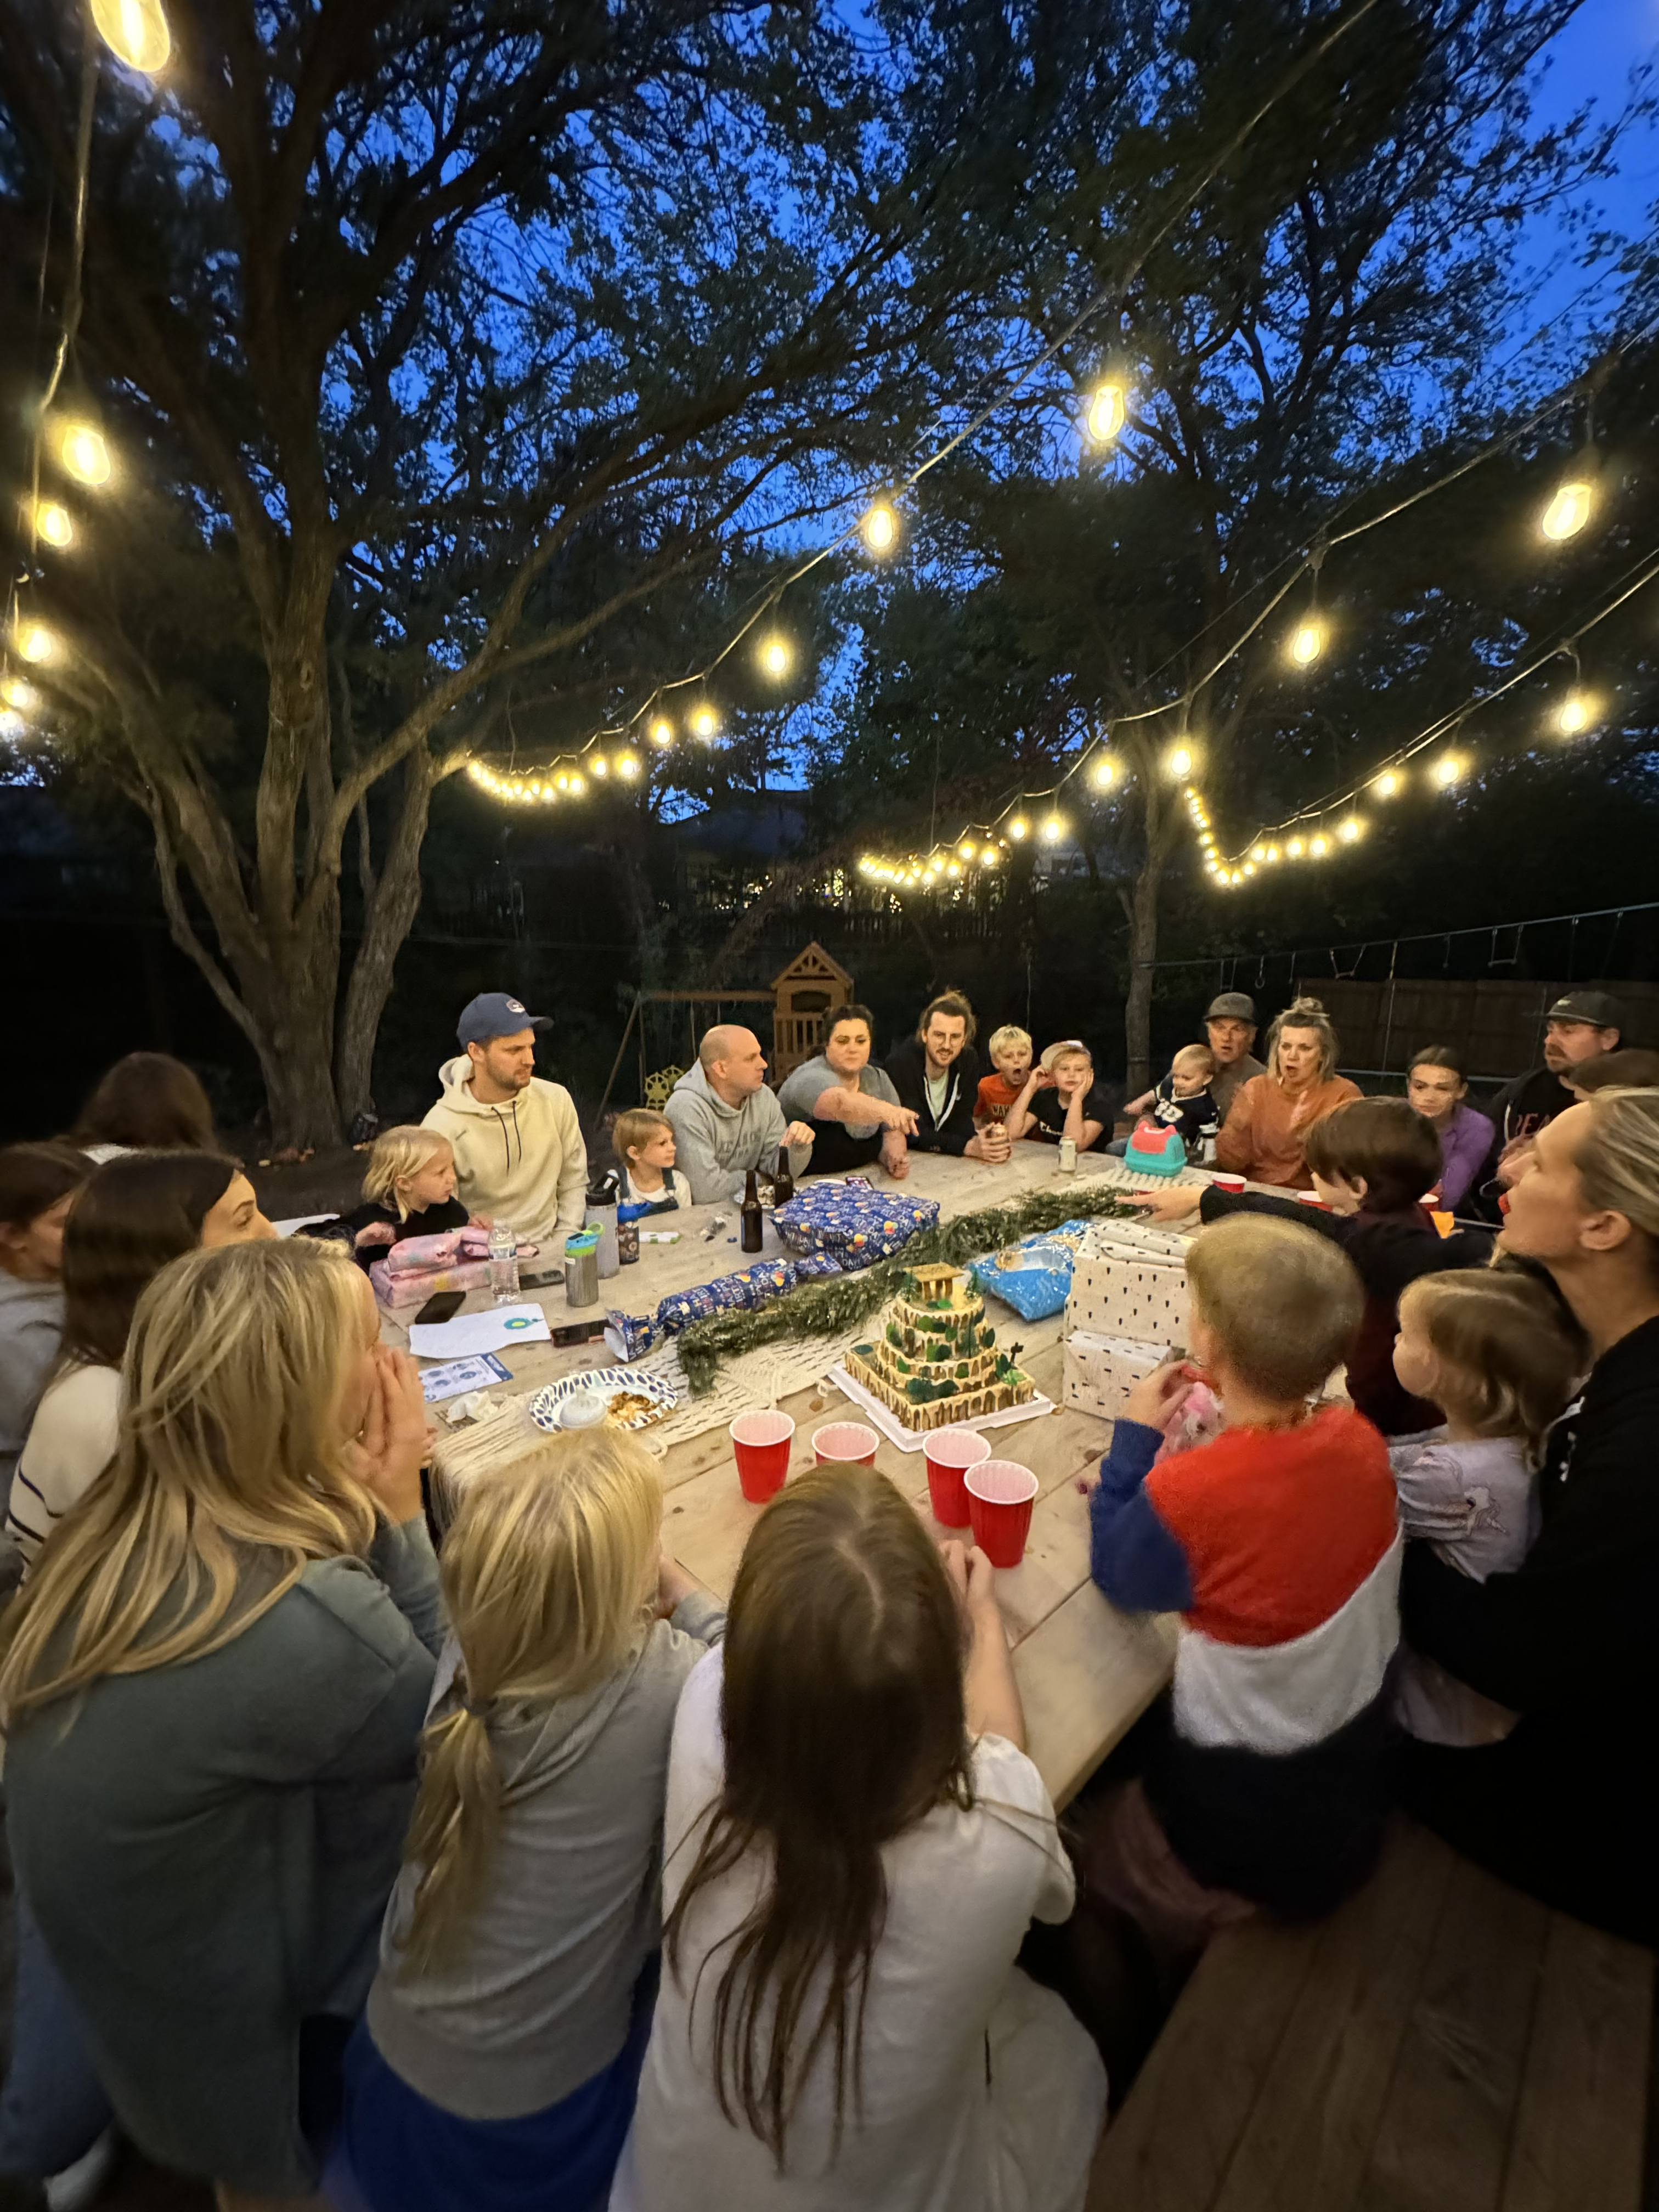 Family gathered around a large wooden table on the patio at dusk with lights strung up above.